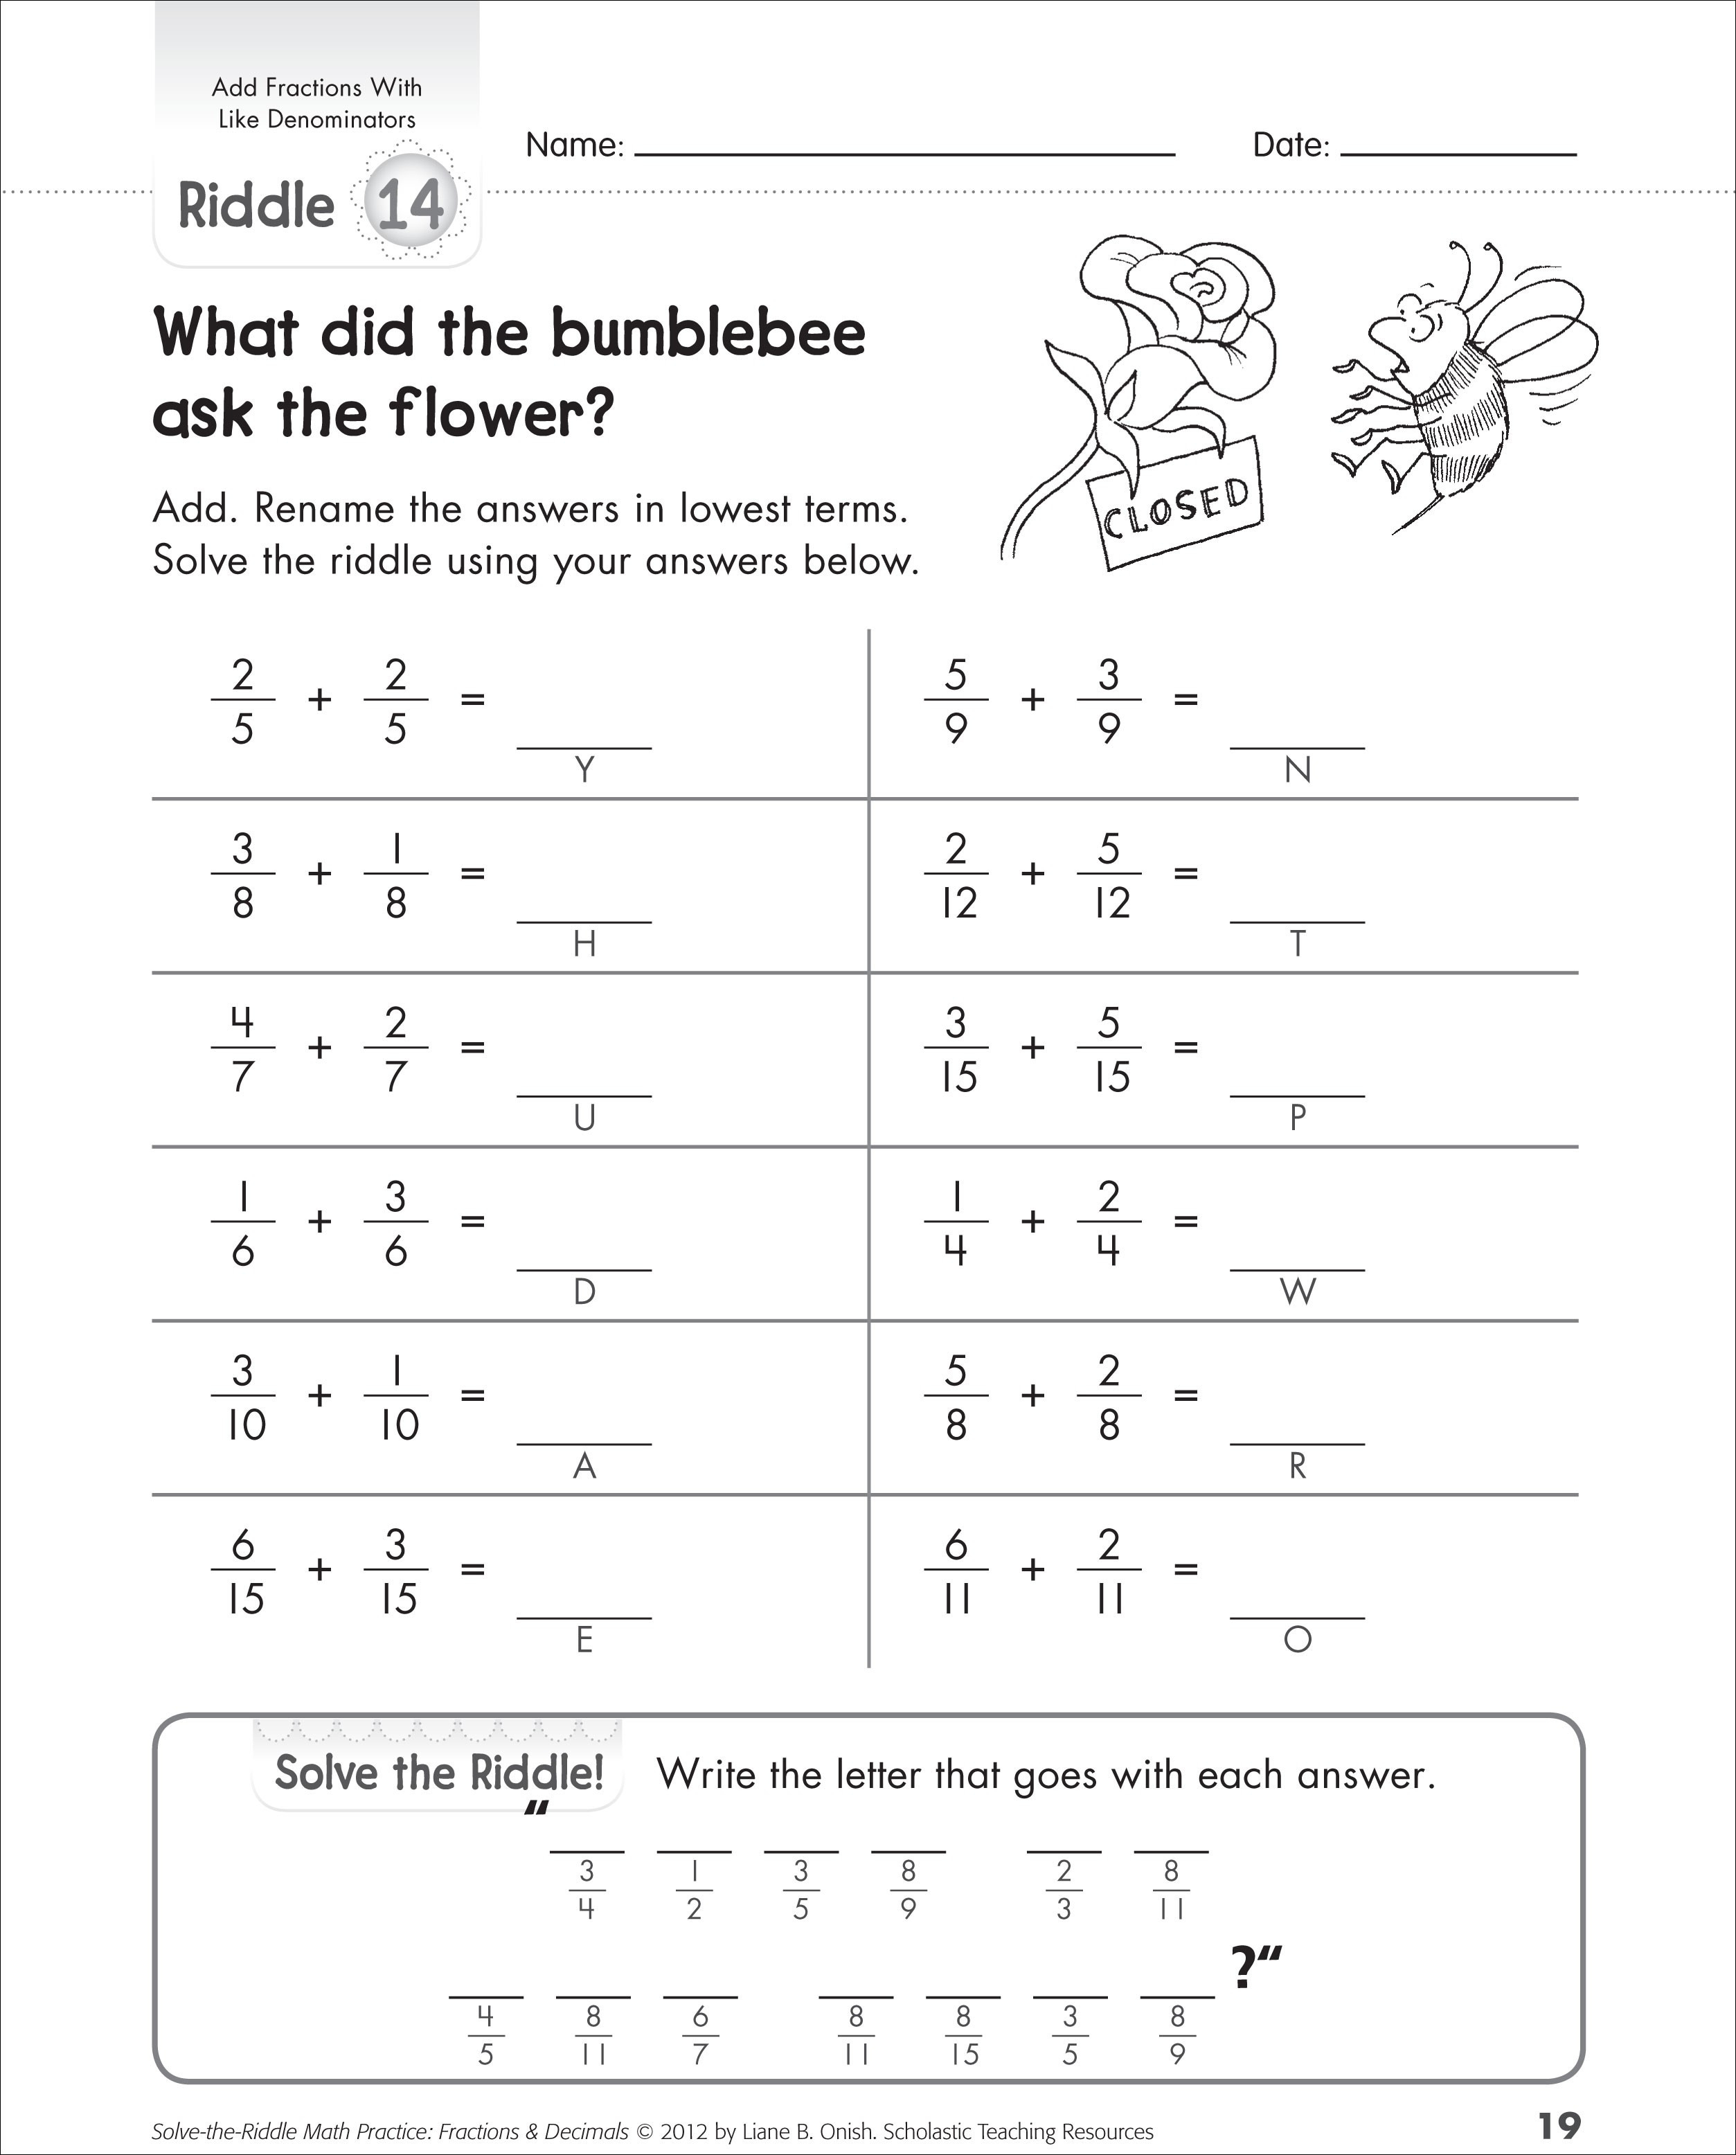 butterfly-method-for-adding-and-subtracting-fractions-worksheet-5th